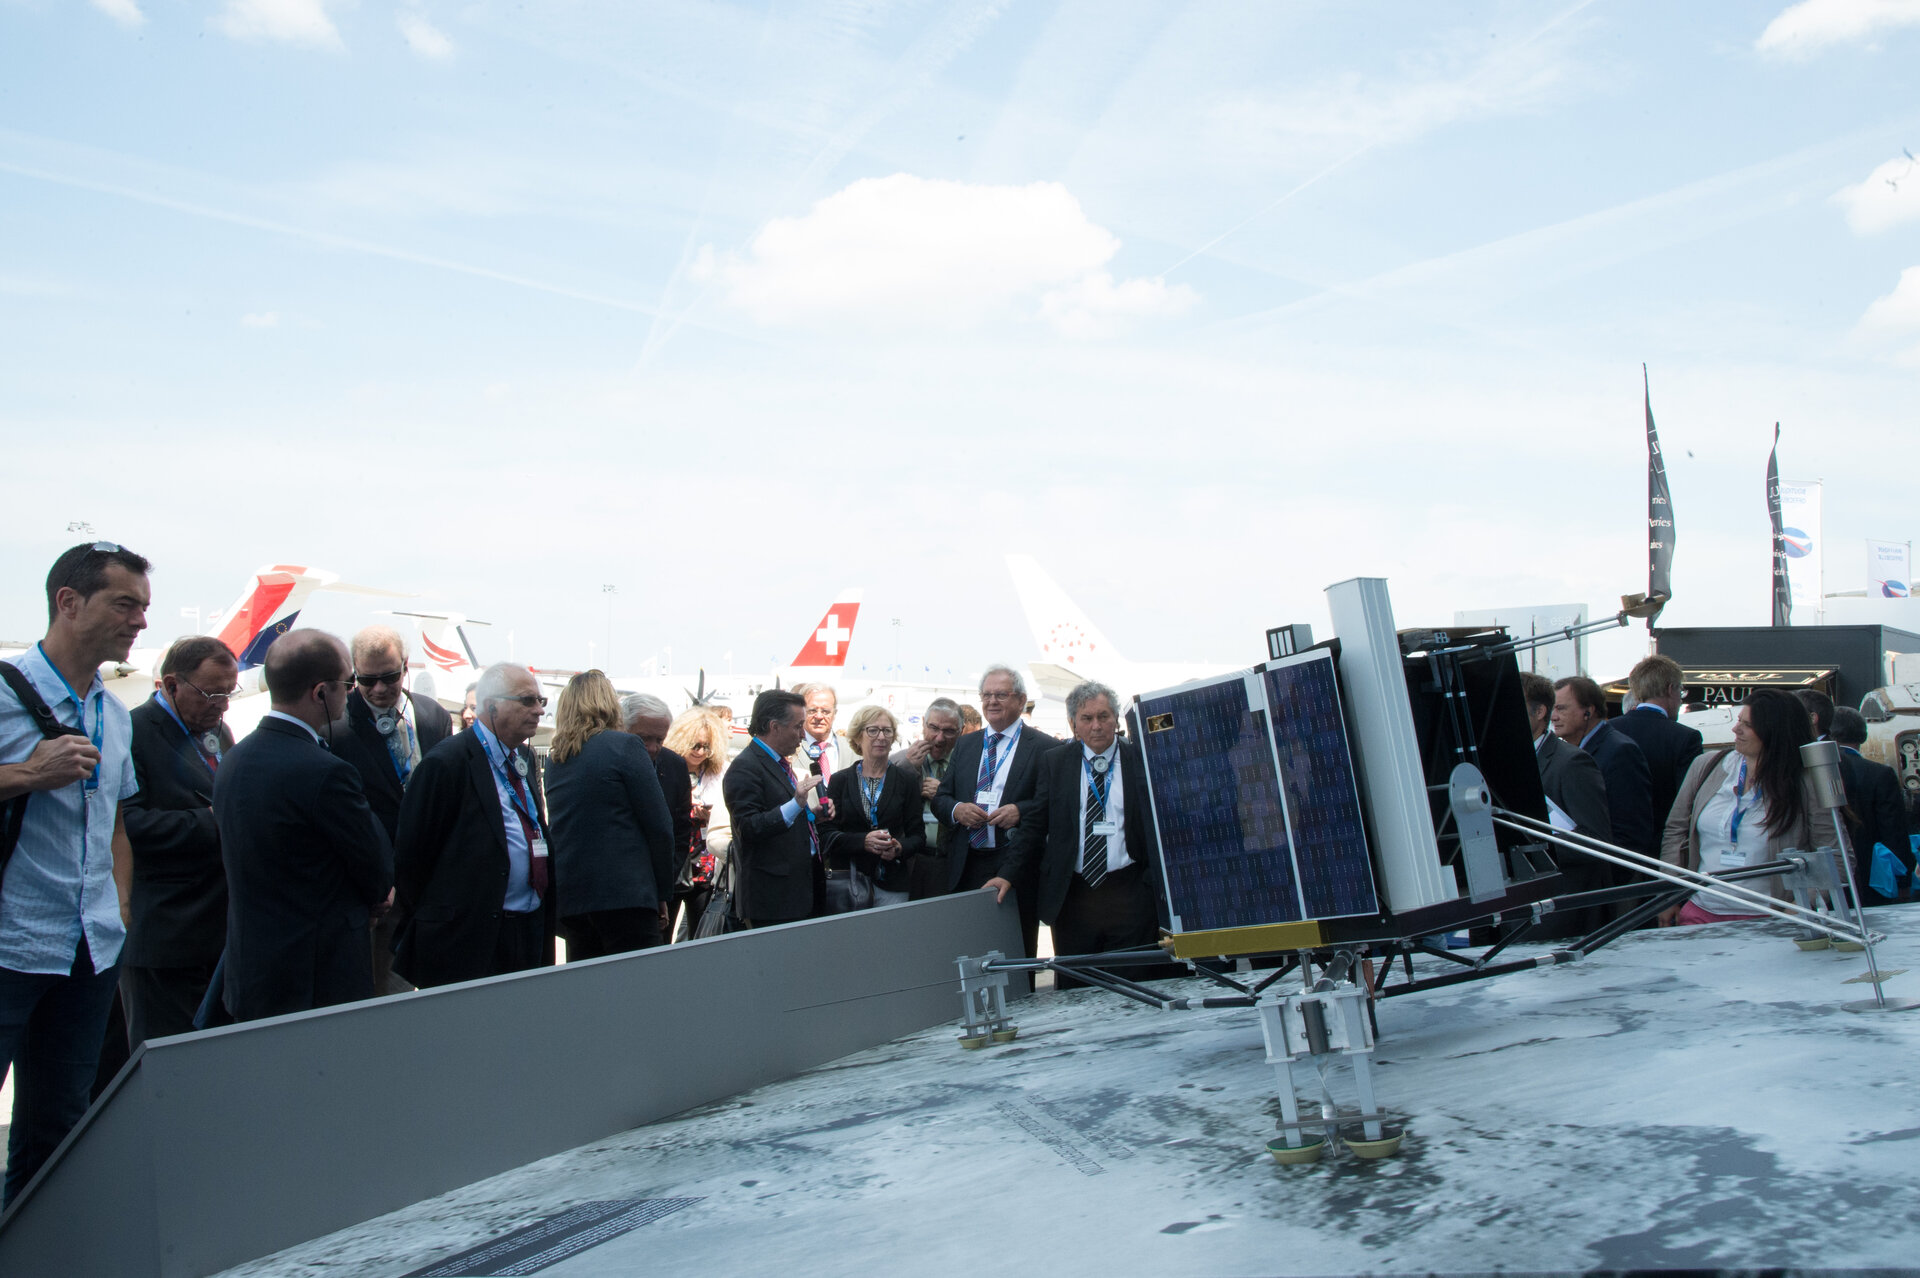 Members of the French Parliament visit the ESA Pavilion